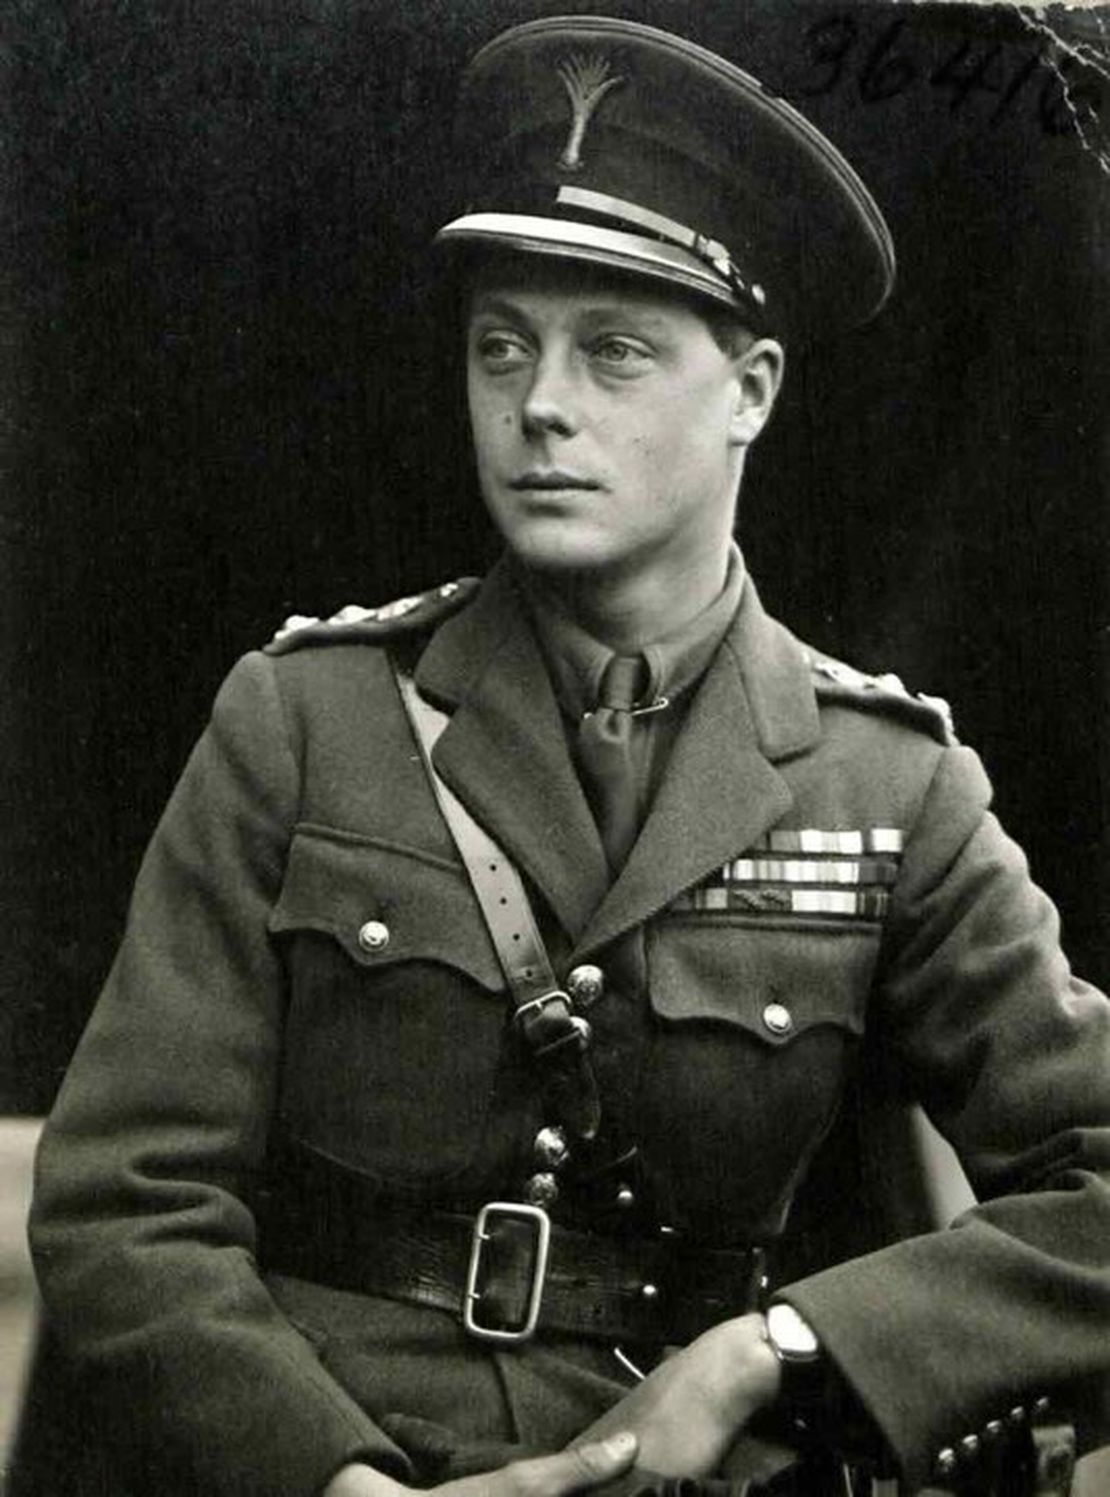 King Edward VIII abdicated and King George VI acceded to the throne